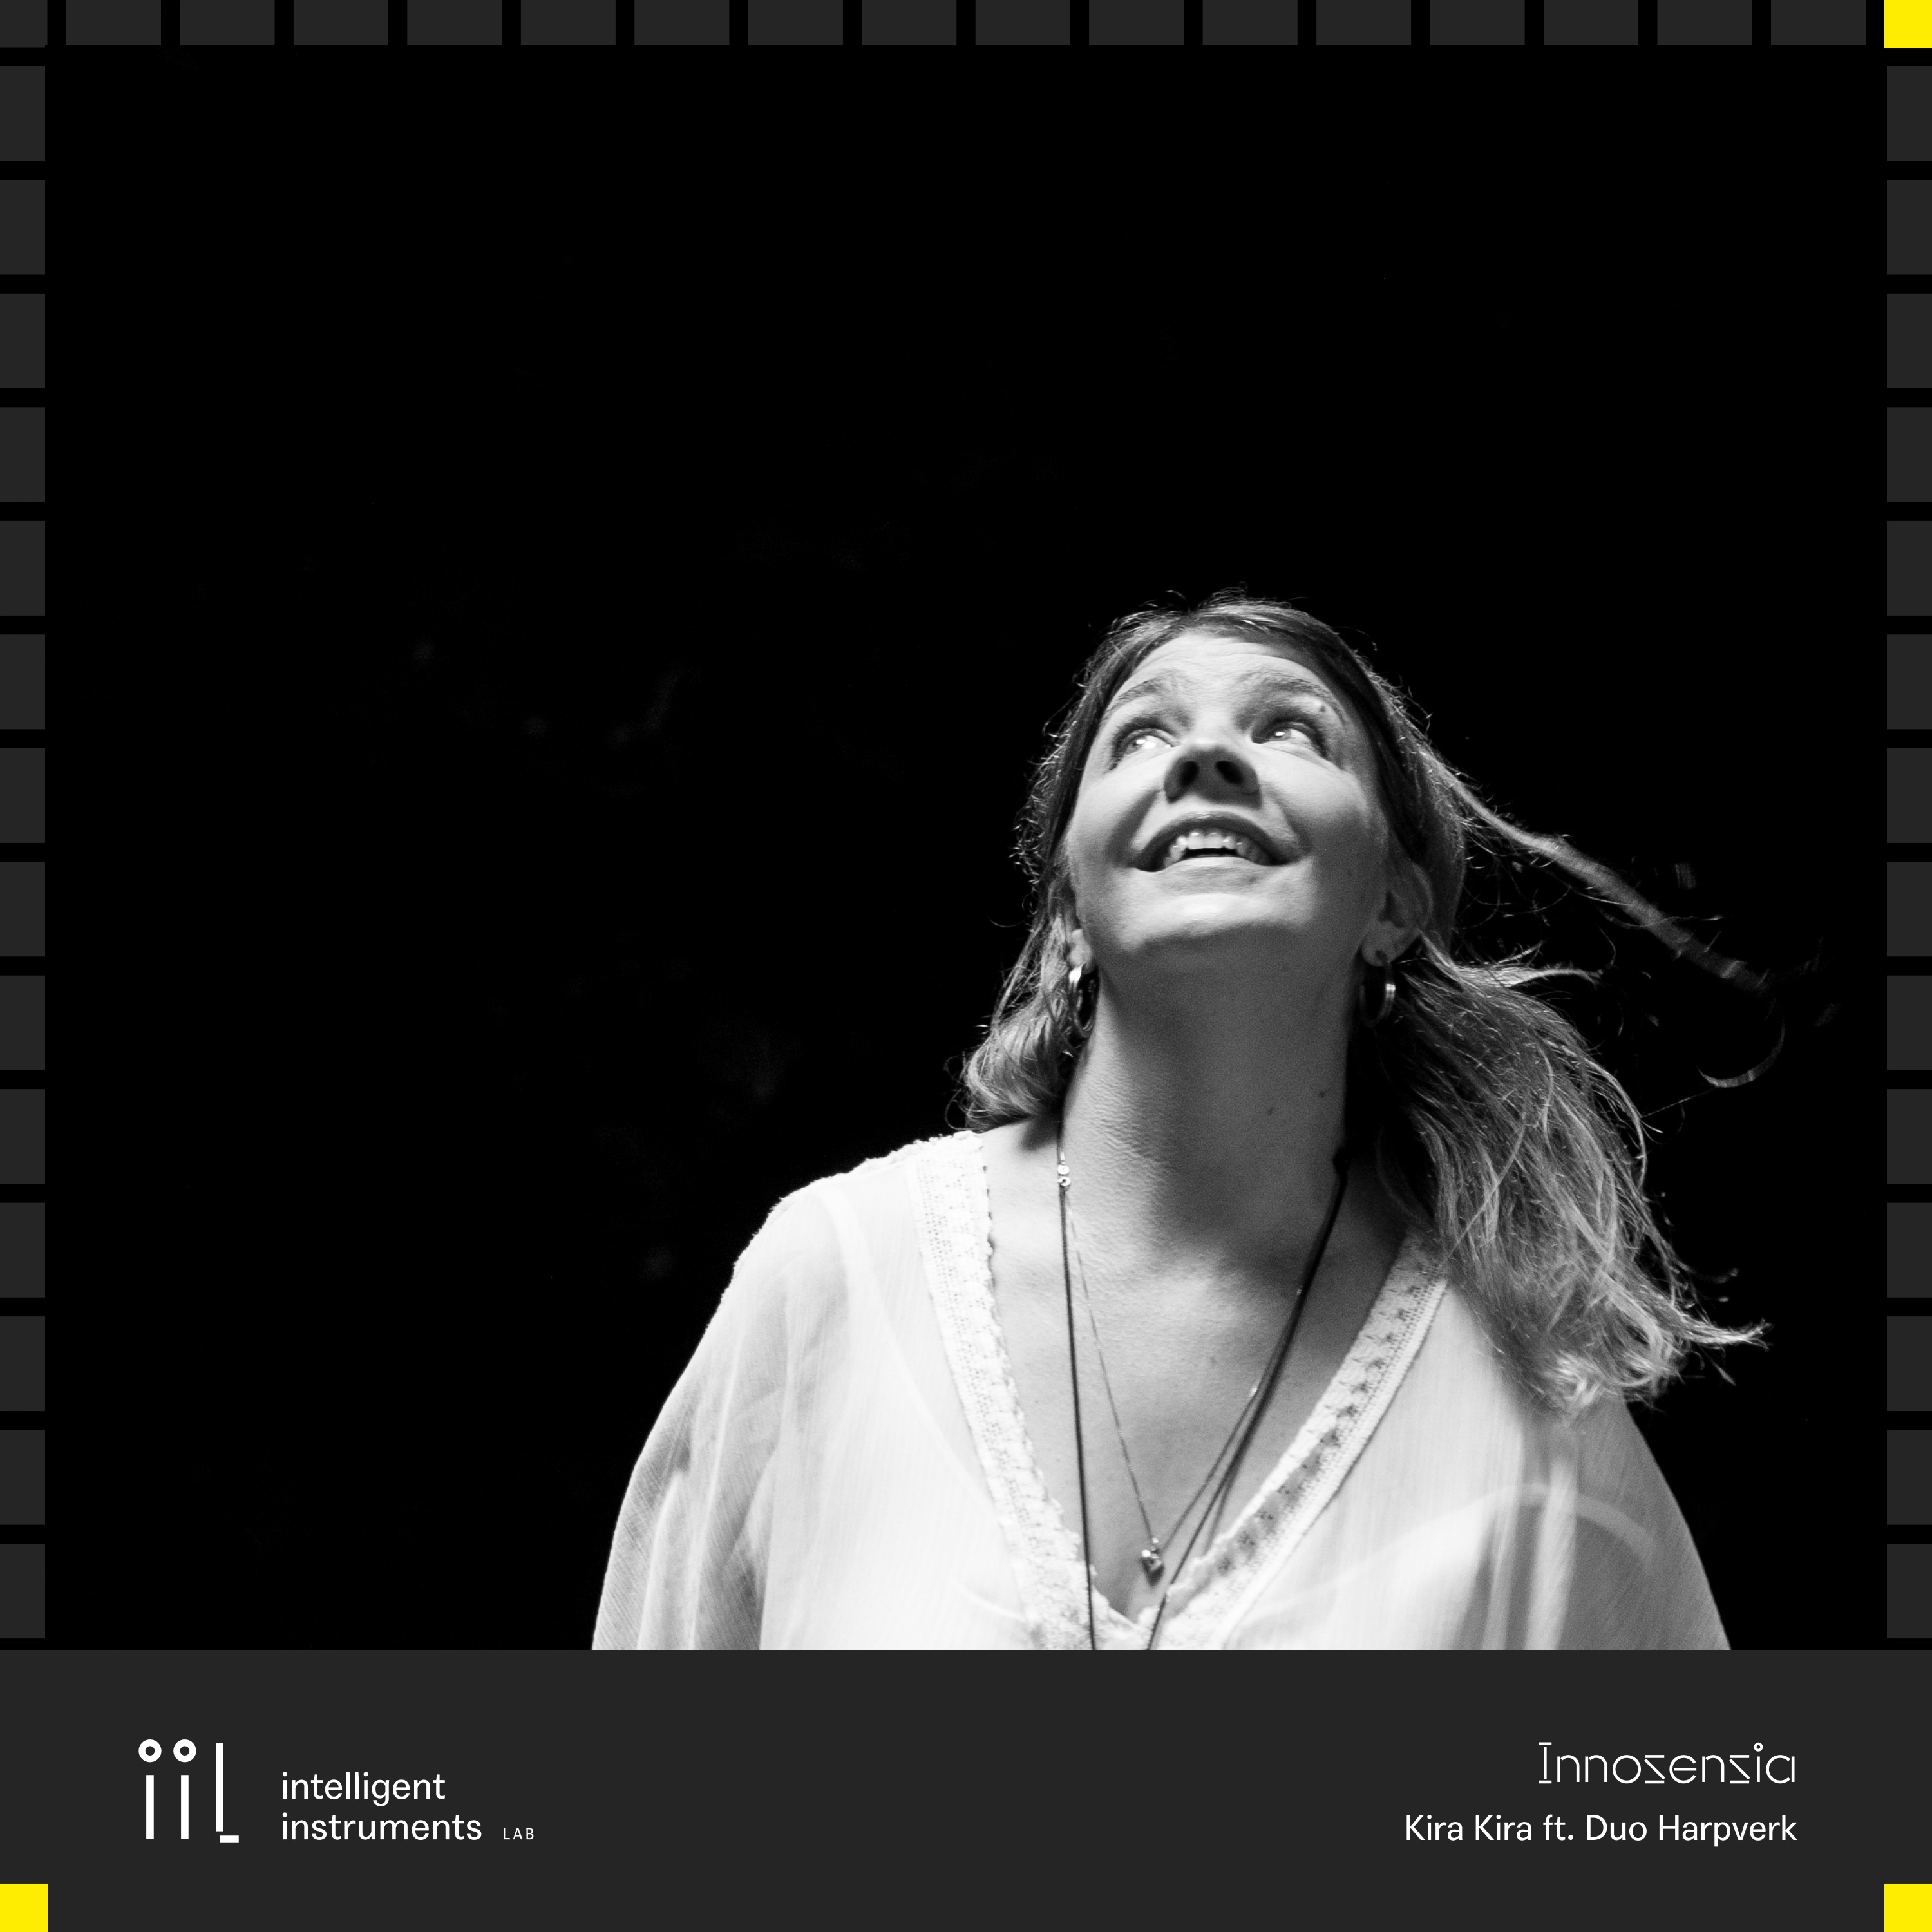 An album art work with a black and white photo of a young woman, text at the bottom saying Intelligent Instruments Lab, Innosensia, Kira Kira featuring Duo Harpverk